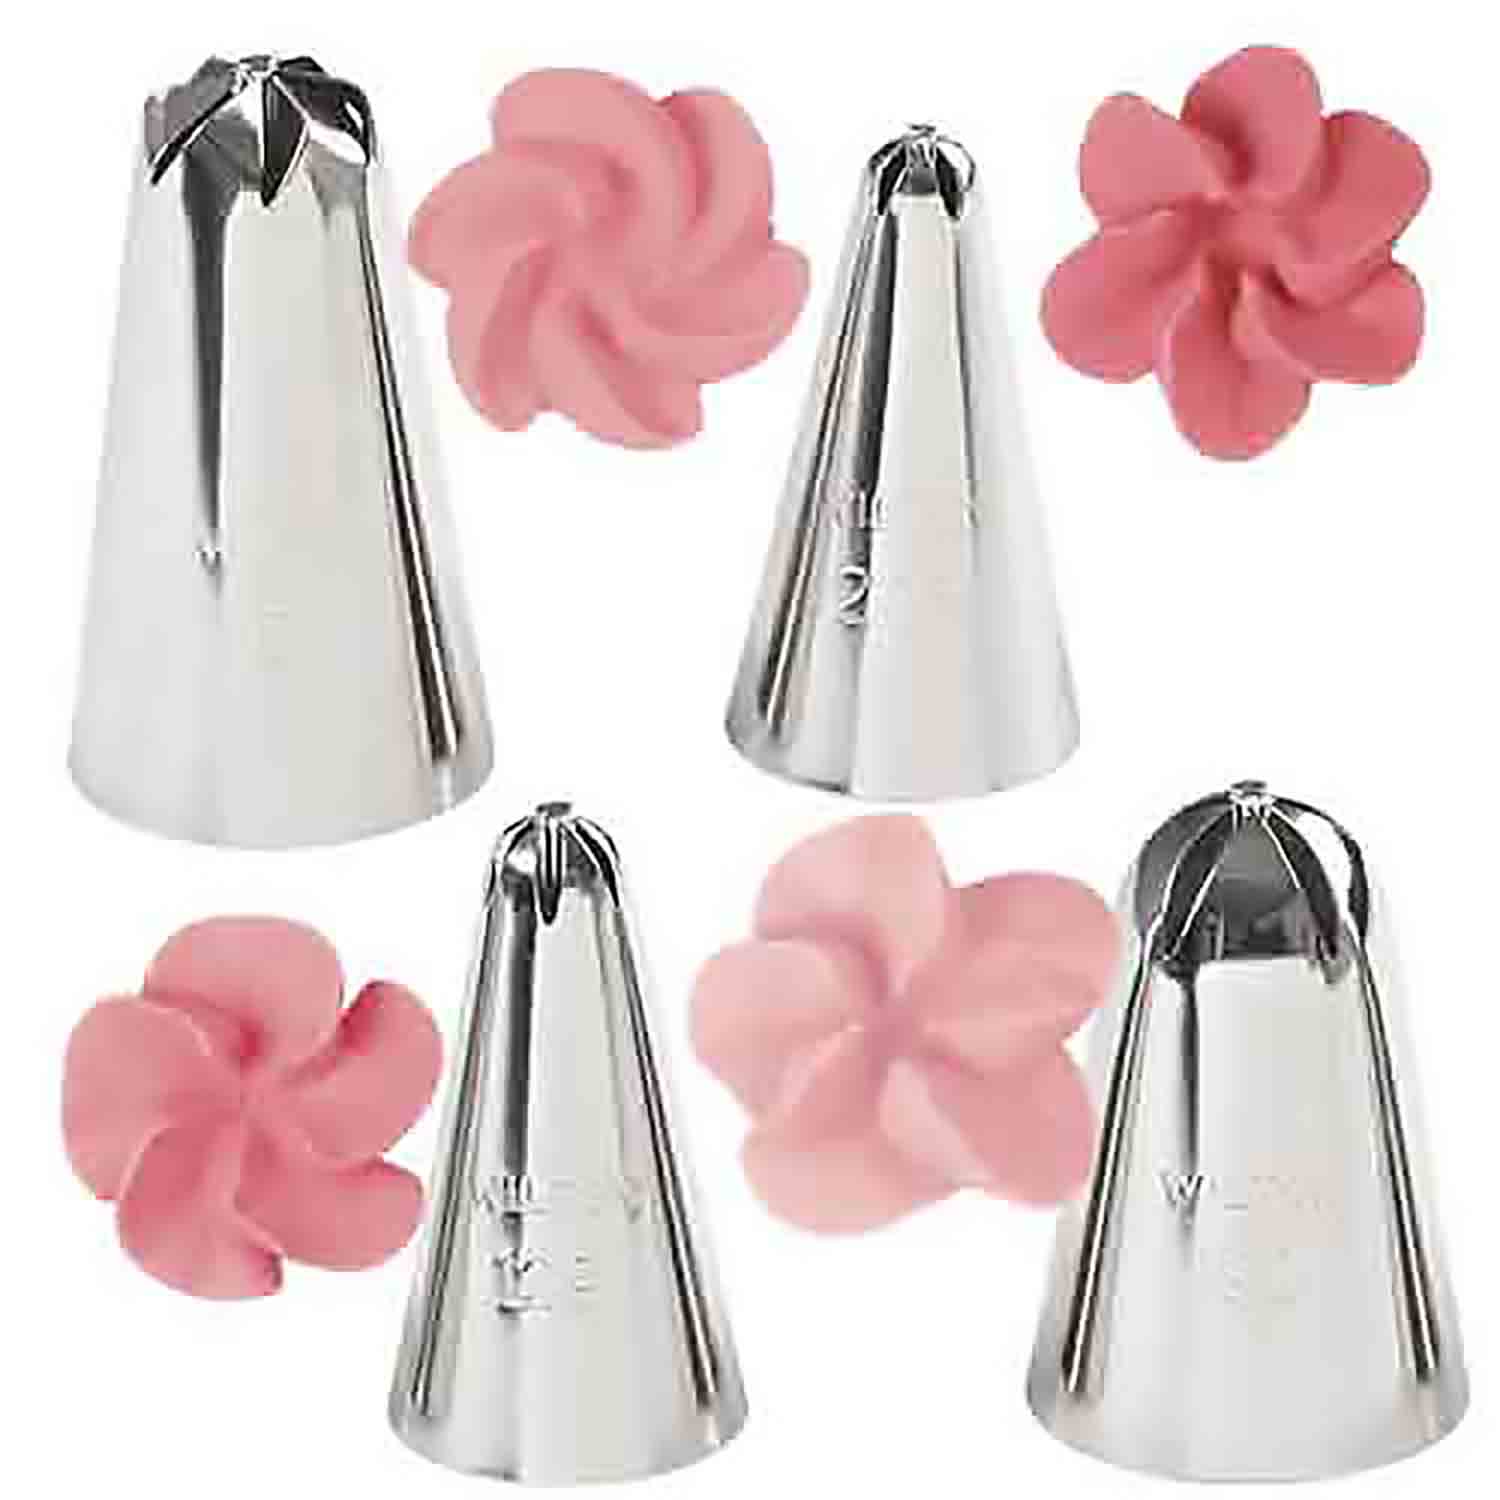 Drop Flowers Piping Tip Set